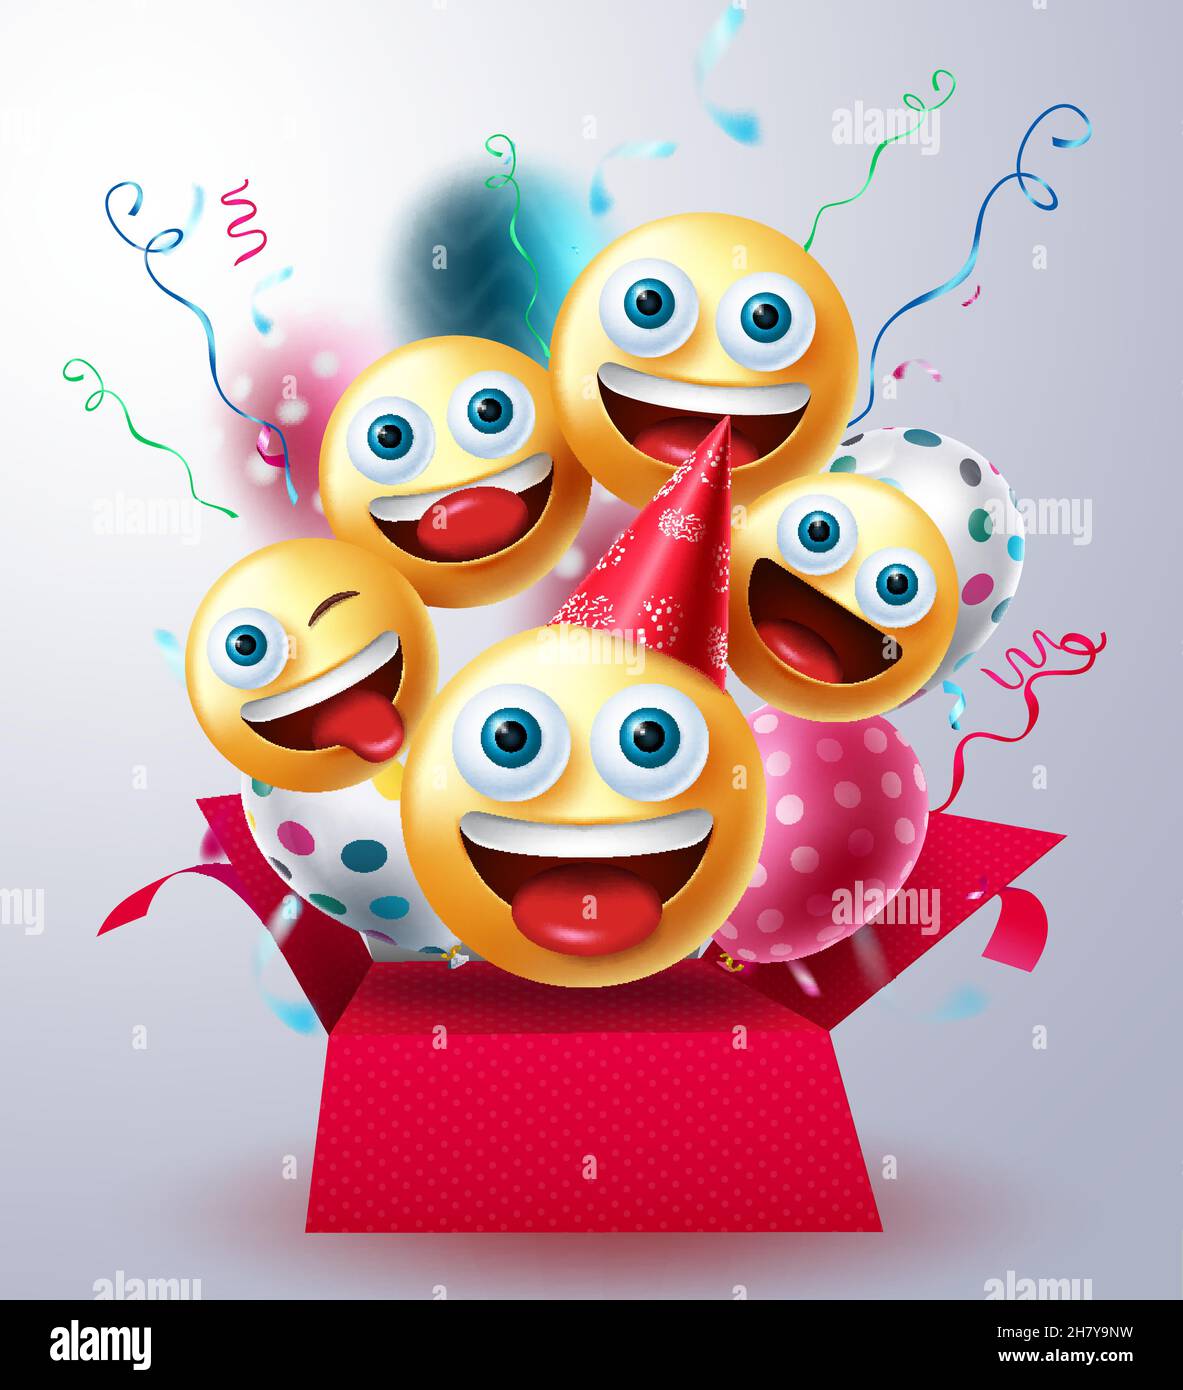 Smileys birthday surprise vector design. Smiley emojis in gift box with balloons and confetti celebration elements for birth day party emoticon. Stock Vector